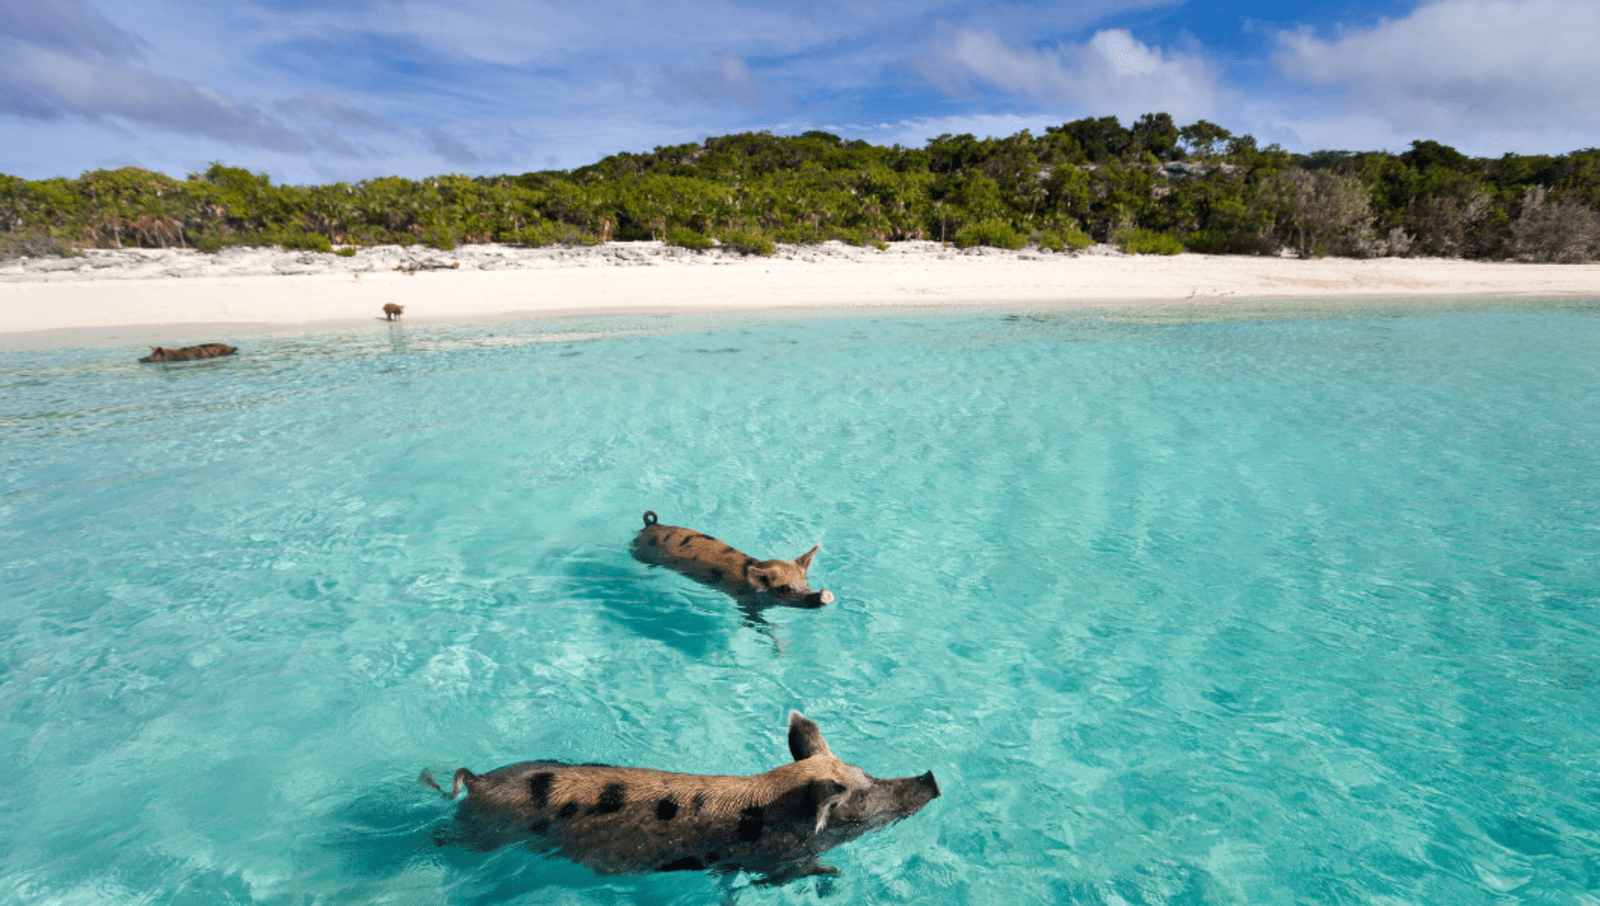 Pigs swimming in the water of Exuma Cays Bahamas